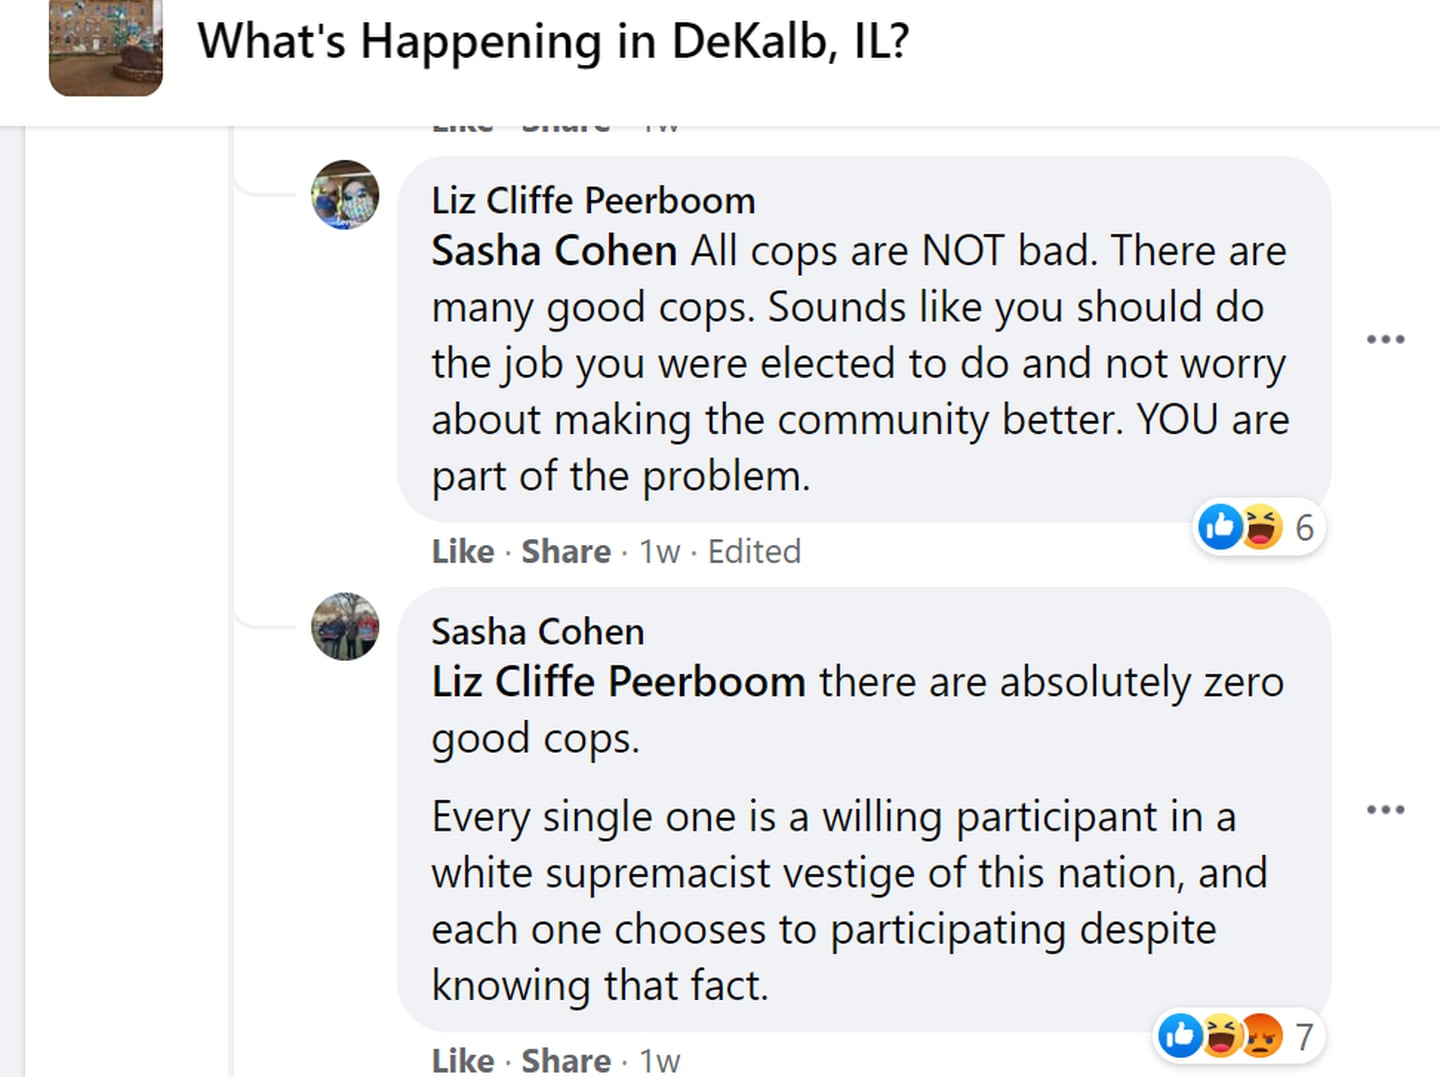 DeKalb City Clerk Sasha Cohen’s public apology came after DeKalb area residents expressed concerns this month in community social media groups about Cohen posting criticisms about police and writing “ACAB,” an acronym meaning “all cops are bastards,” in public social media posts as a public official. (Screenshot by Daily Chronicle on 8.24.21)